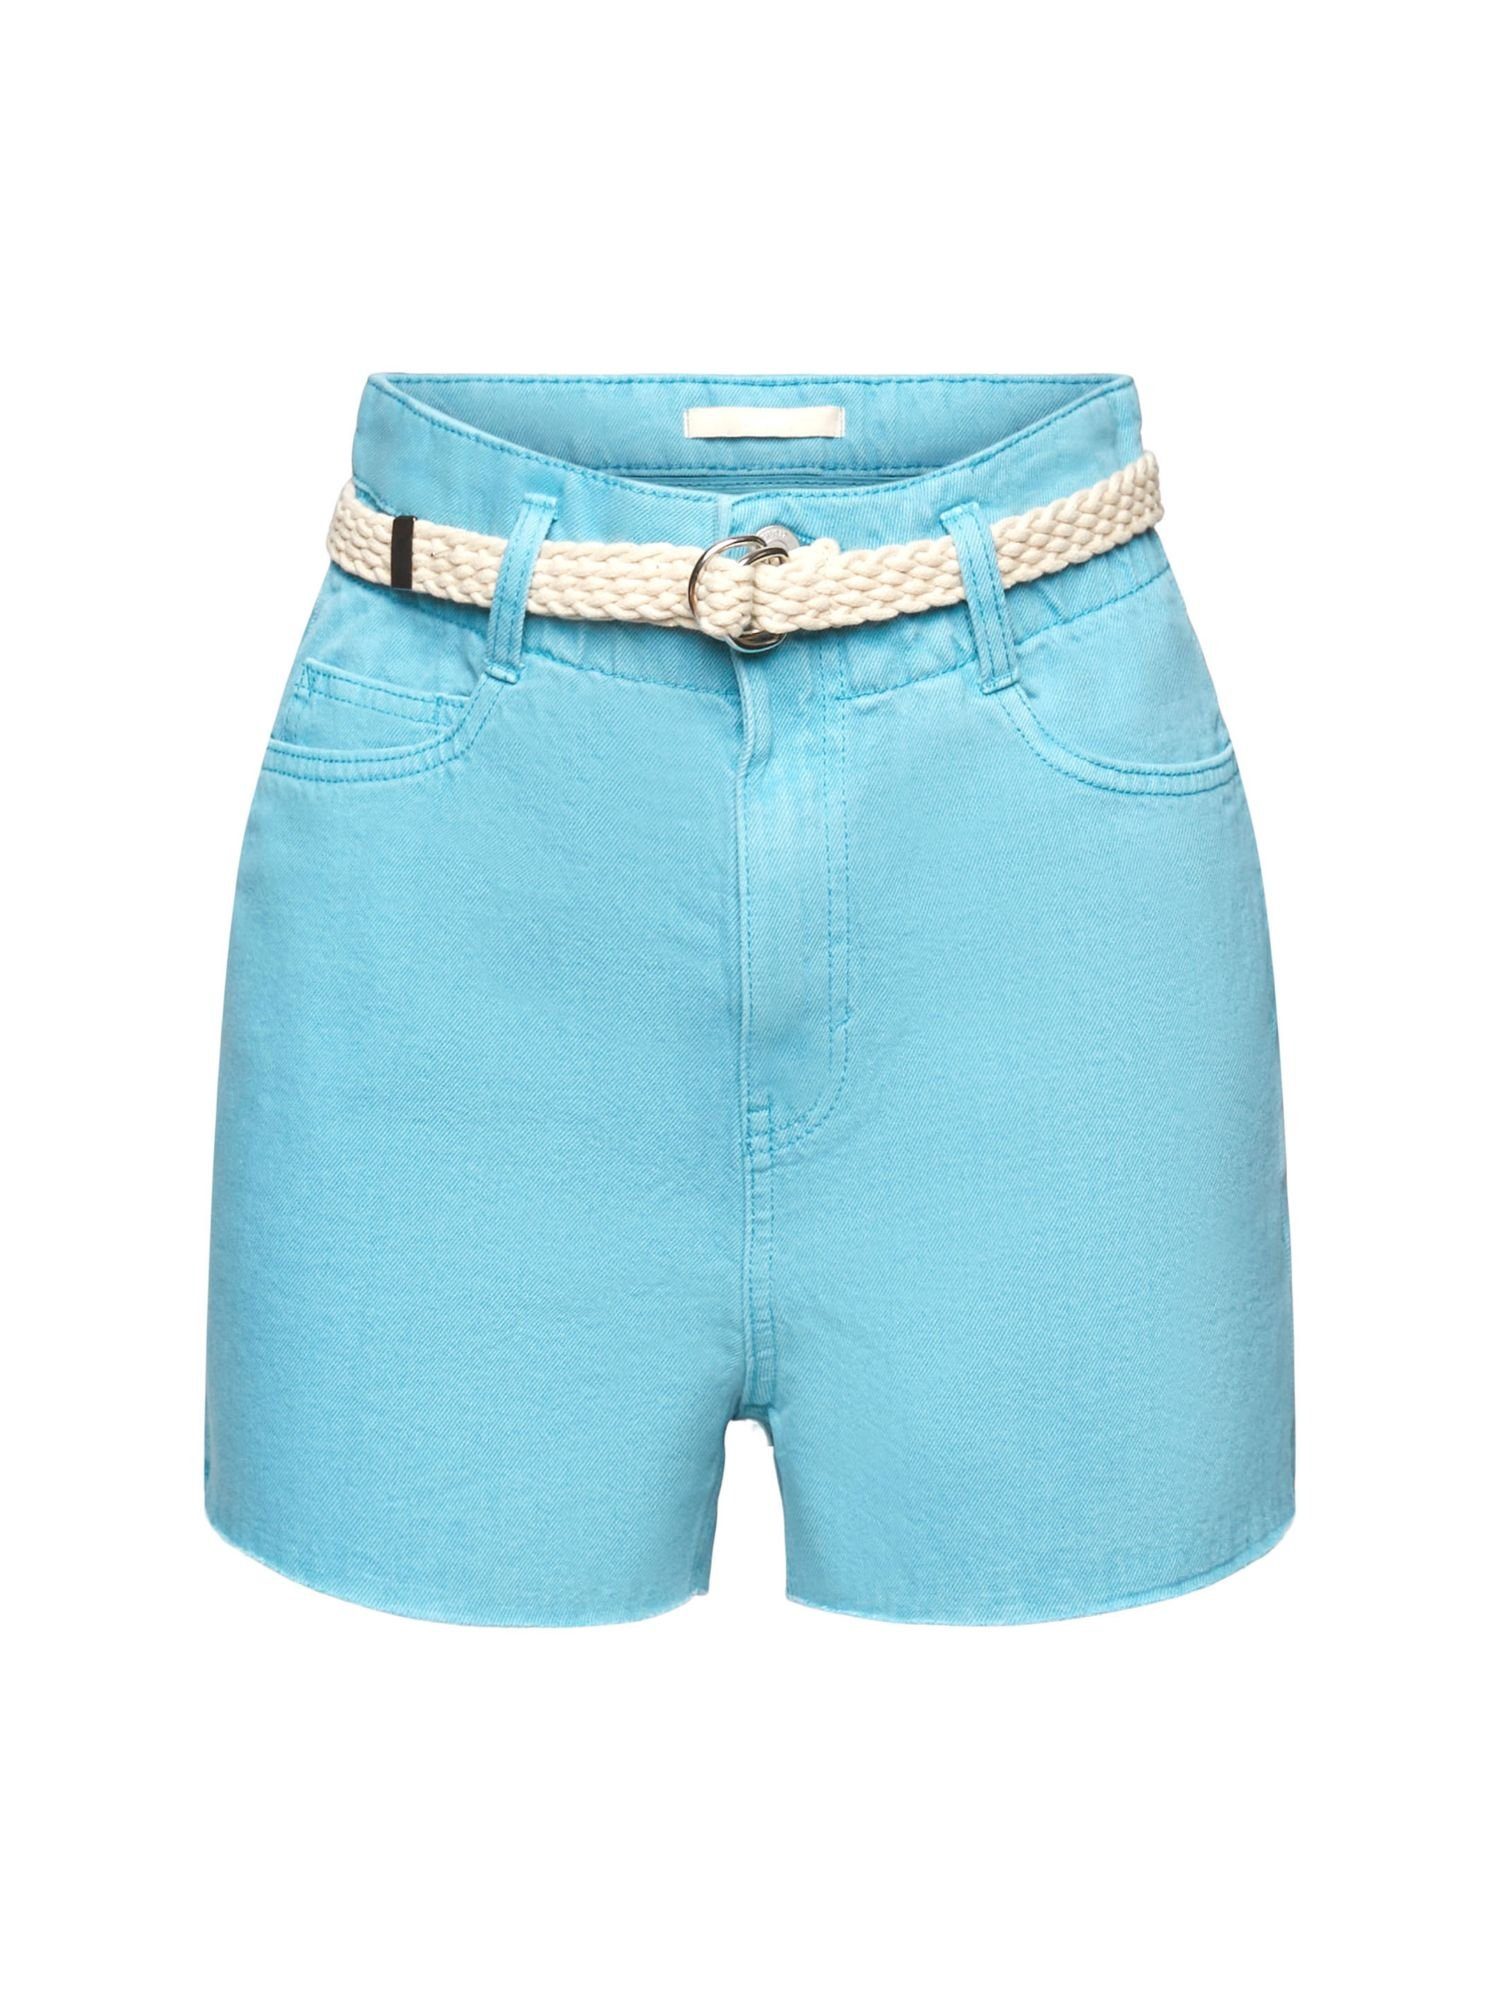 edc by Esprit Shorts Jeansshorts in abgeschnittener Optik (1-tlg) TURQUOISE